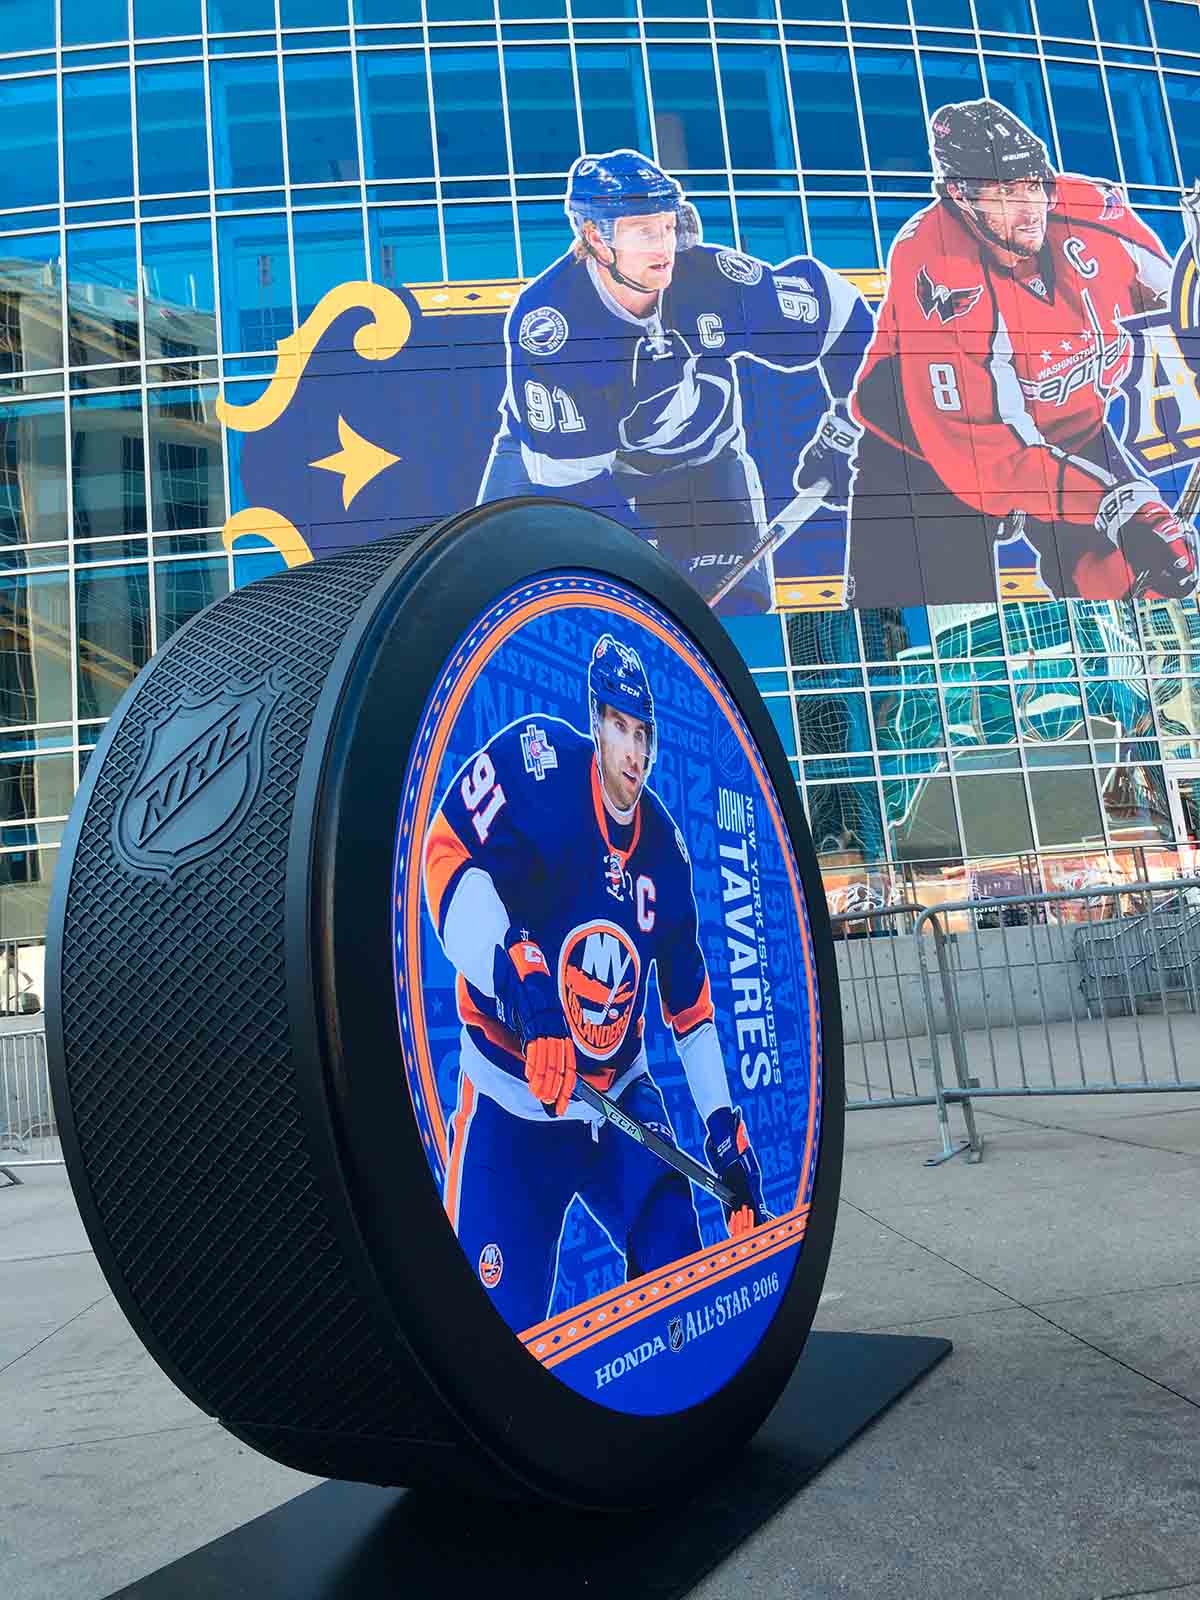 John Tavares is highlighted on a nhl all star game sign